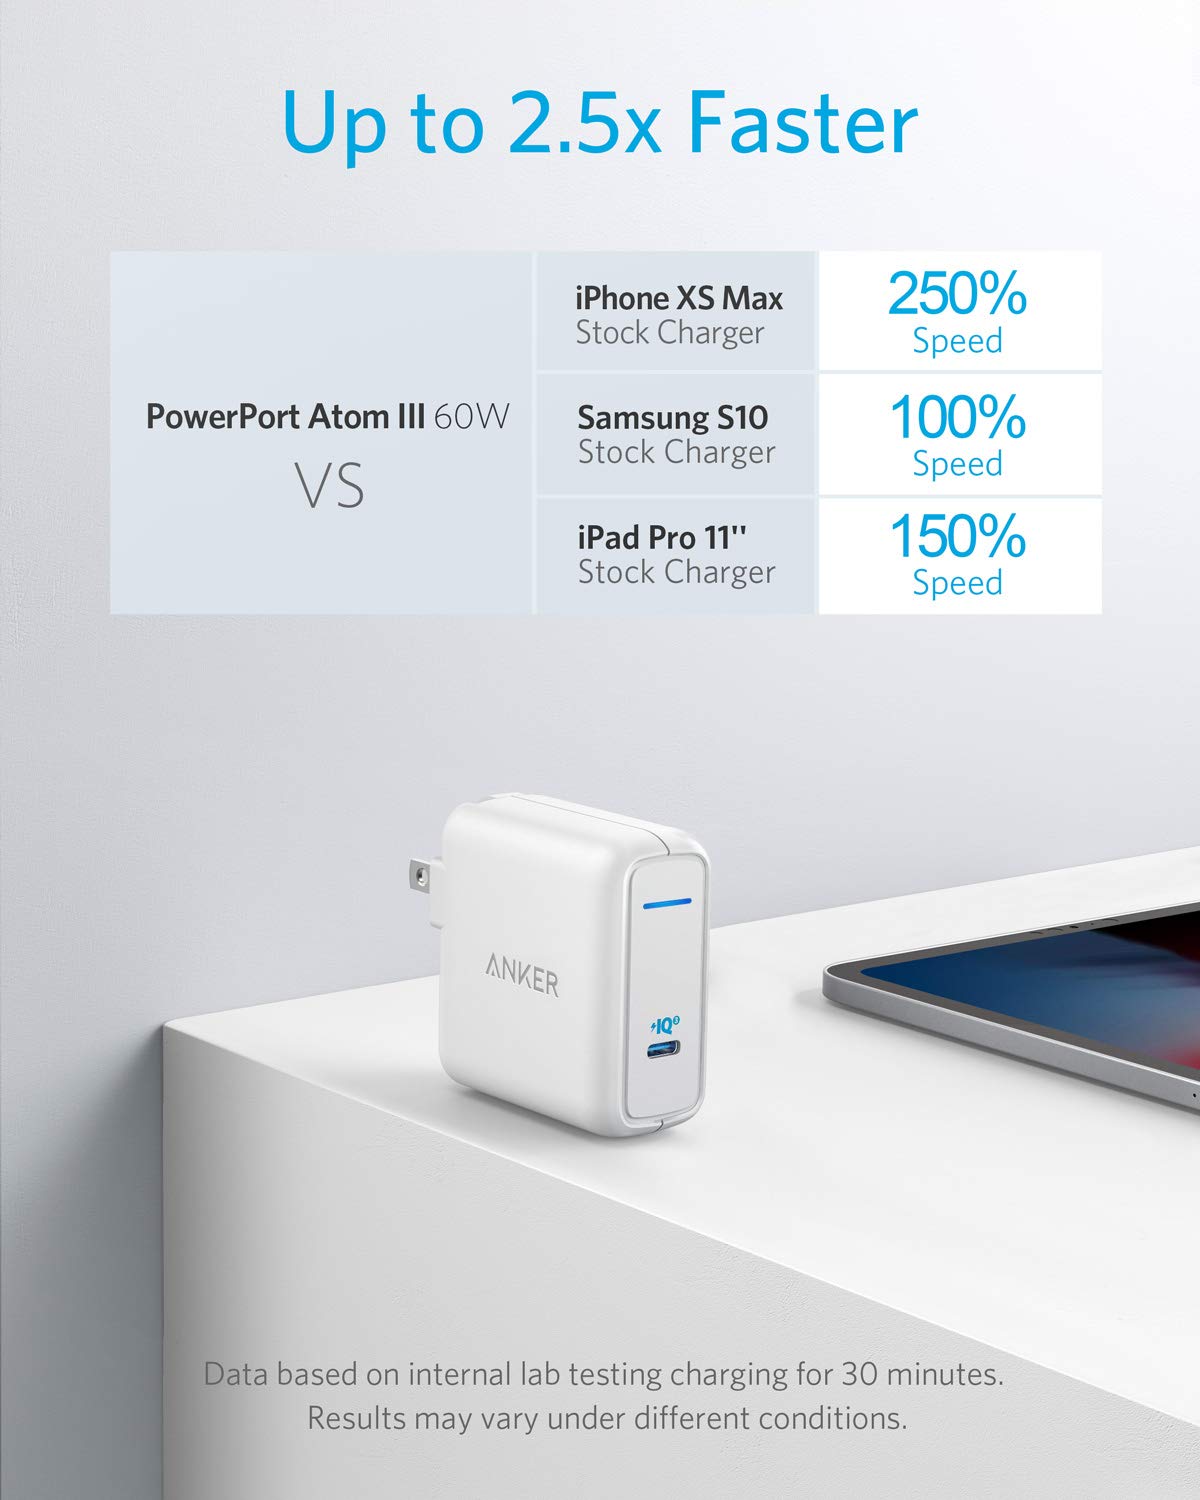 Anker Releases 60W PowerPort Atom III Charger That Uses Gallium Nitride Semiconductors